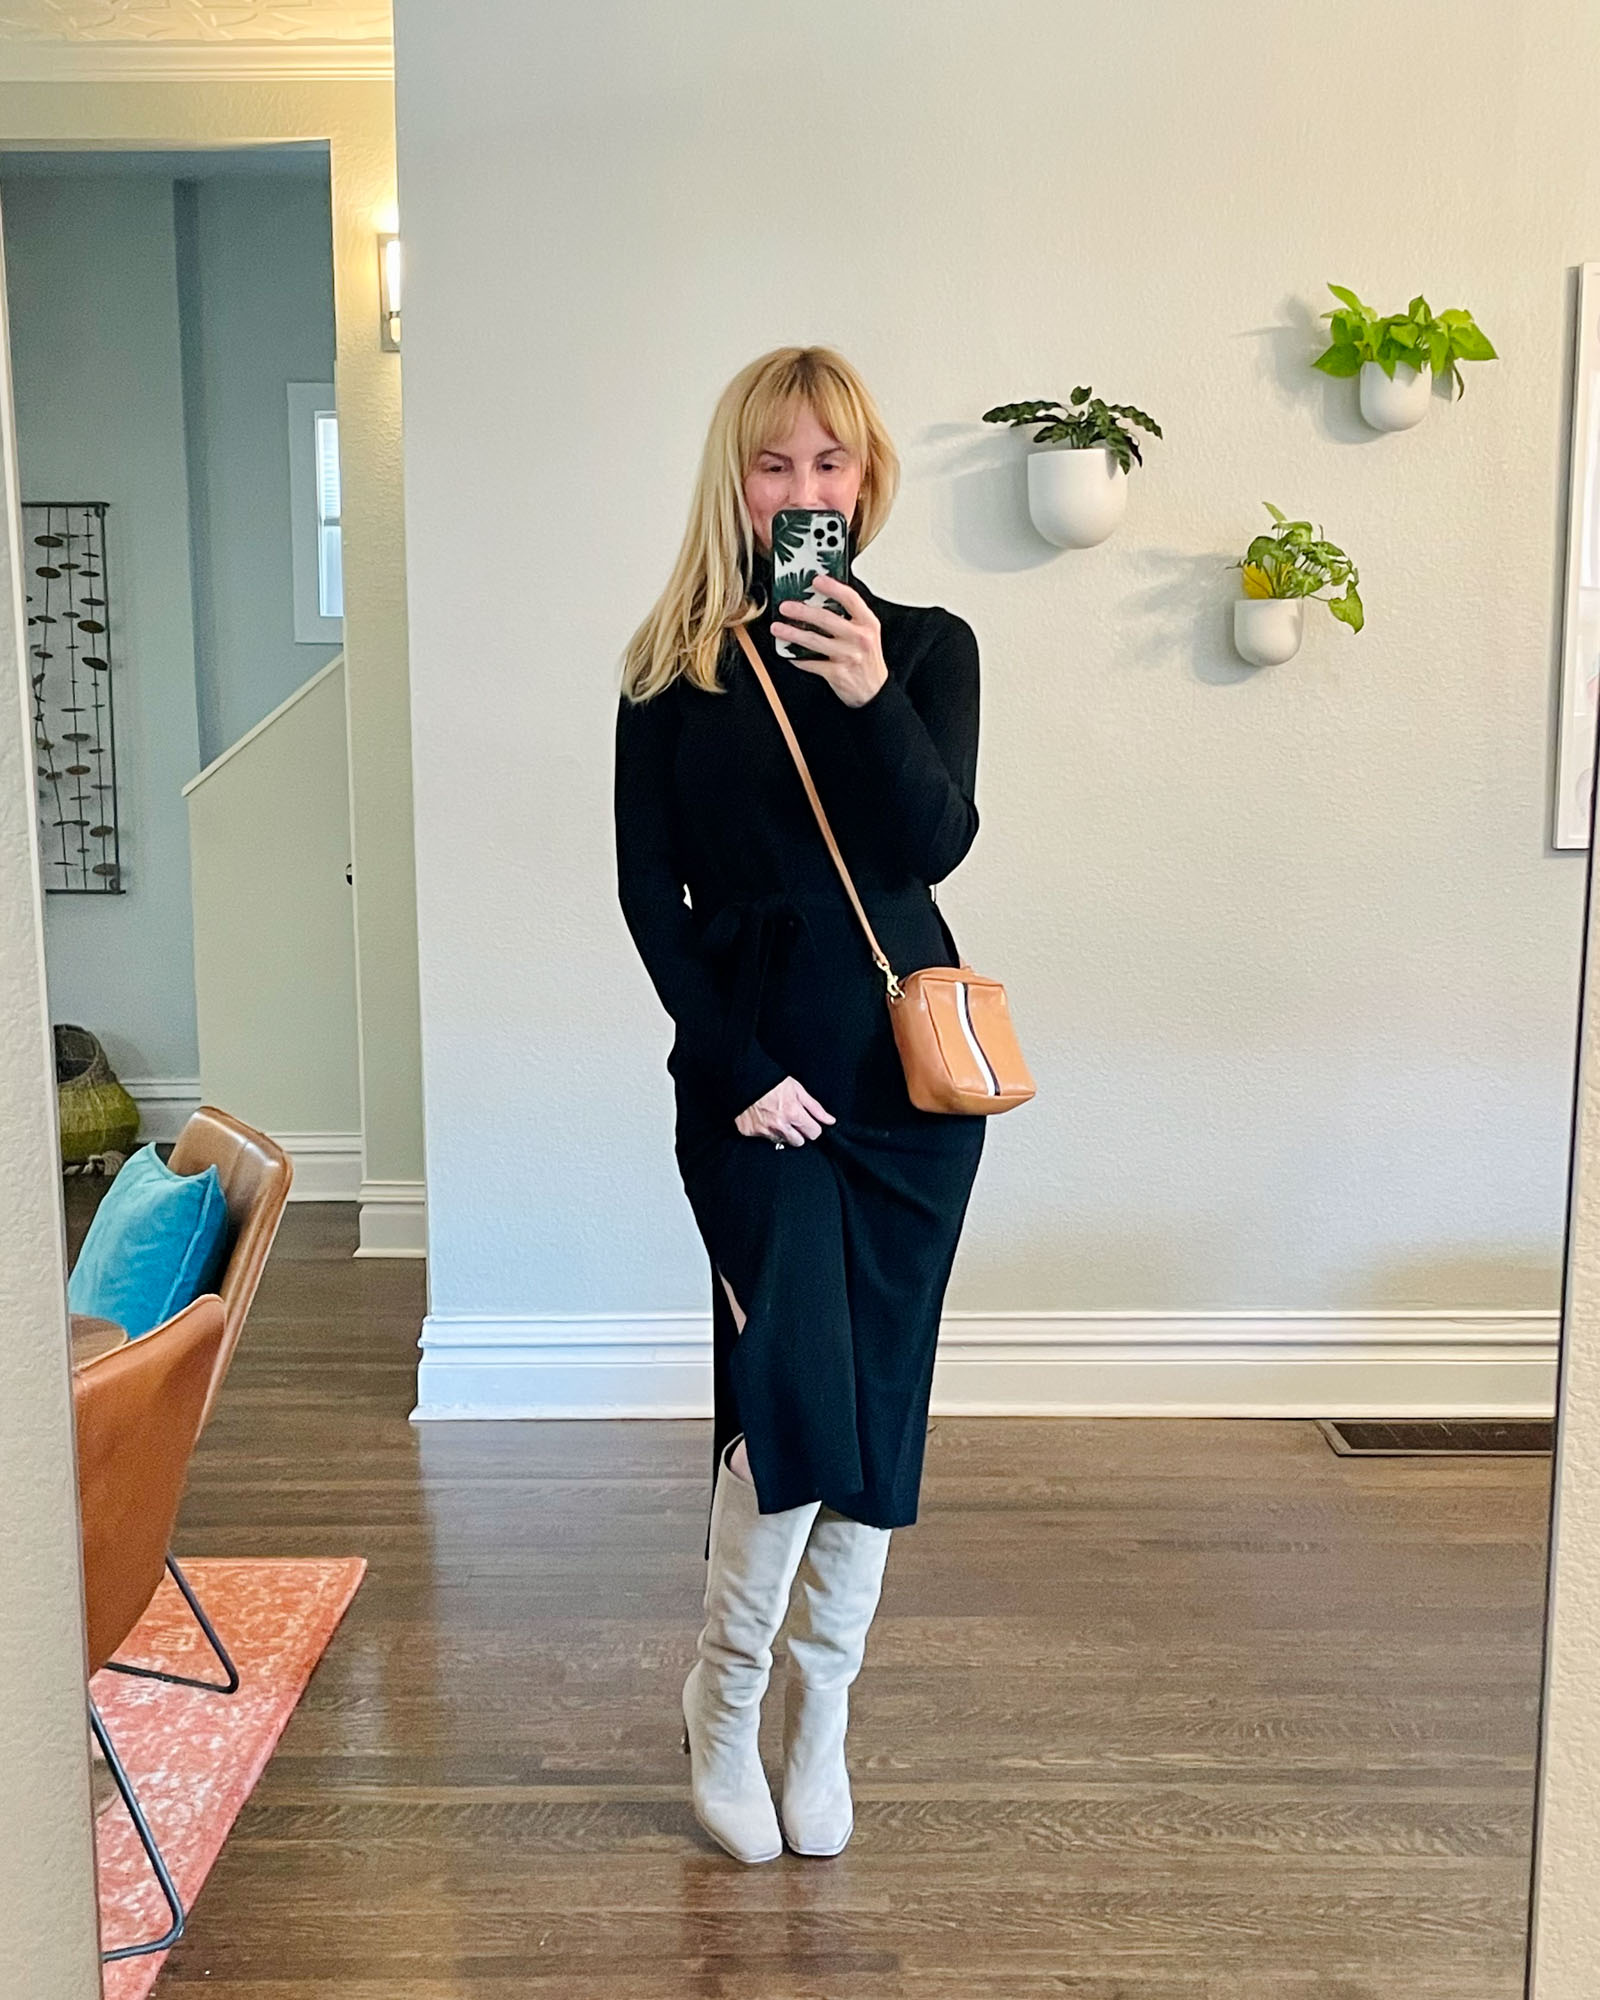 Wearing a black theory cashmere dress with the Sam Edelman Olly knee high boots from the nordstrom anniversary sale.